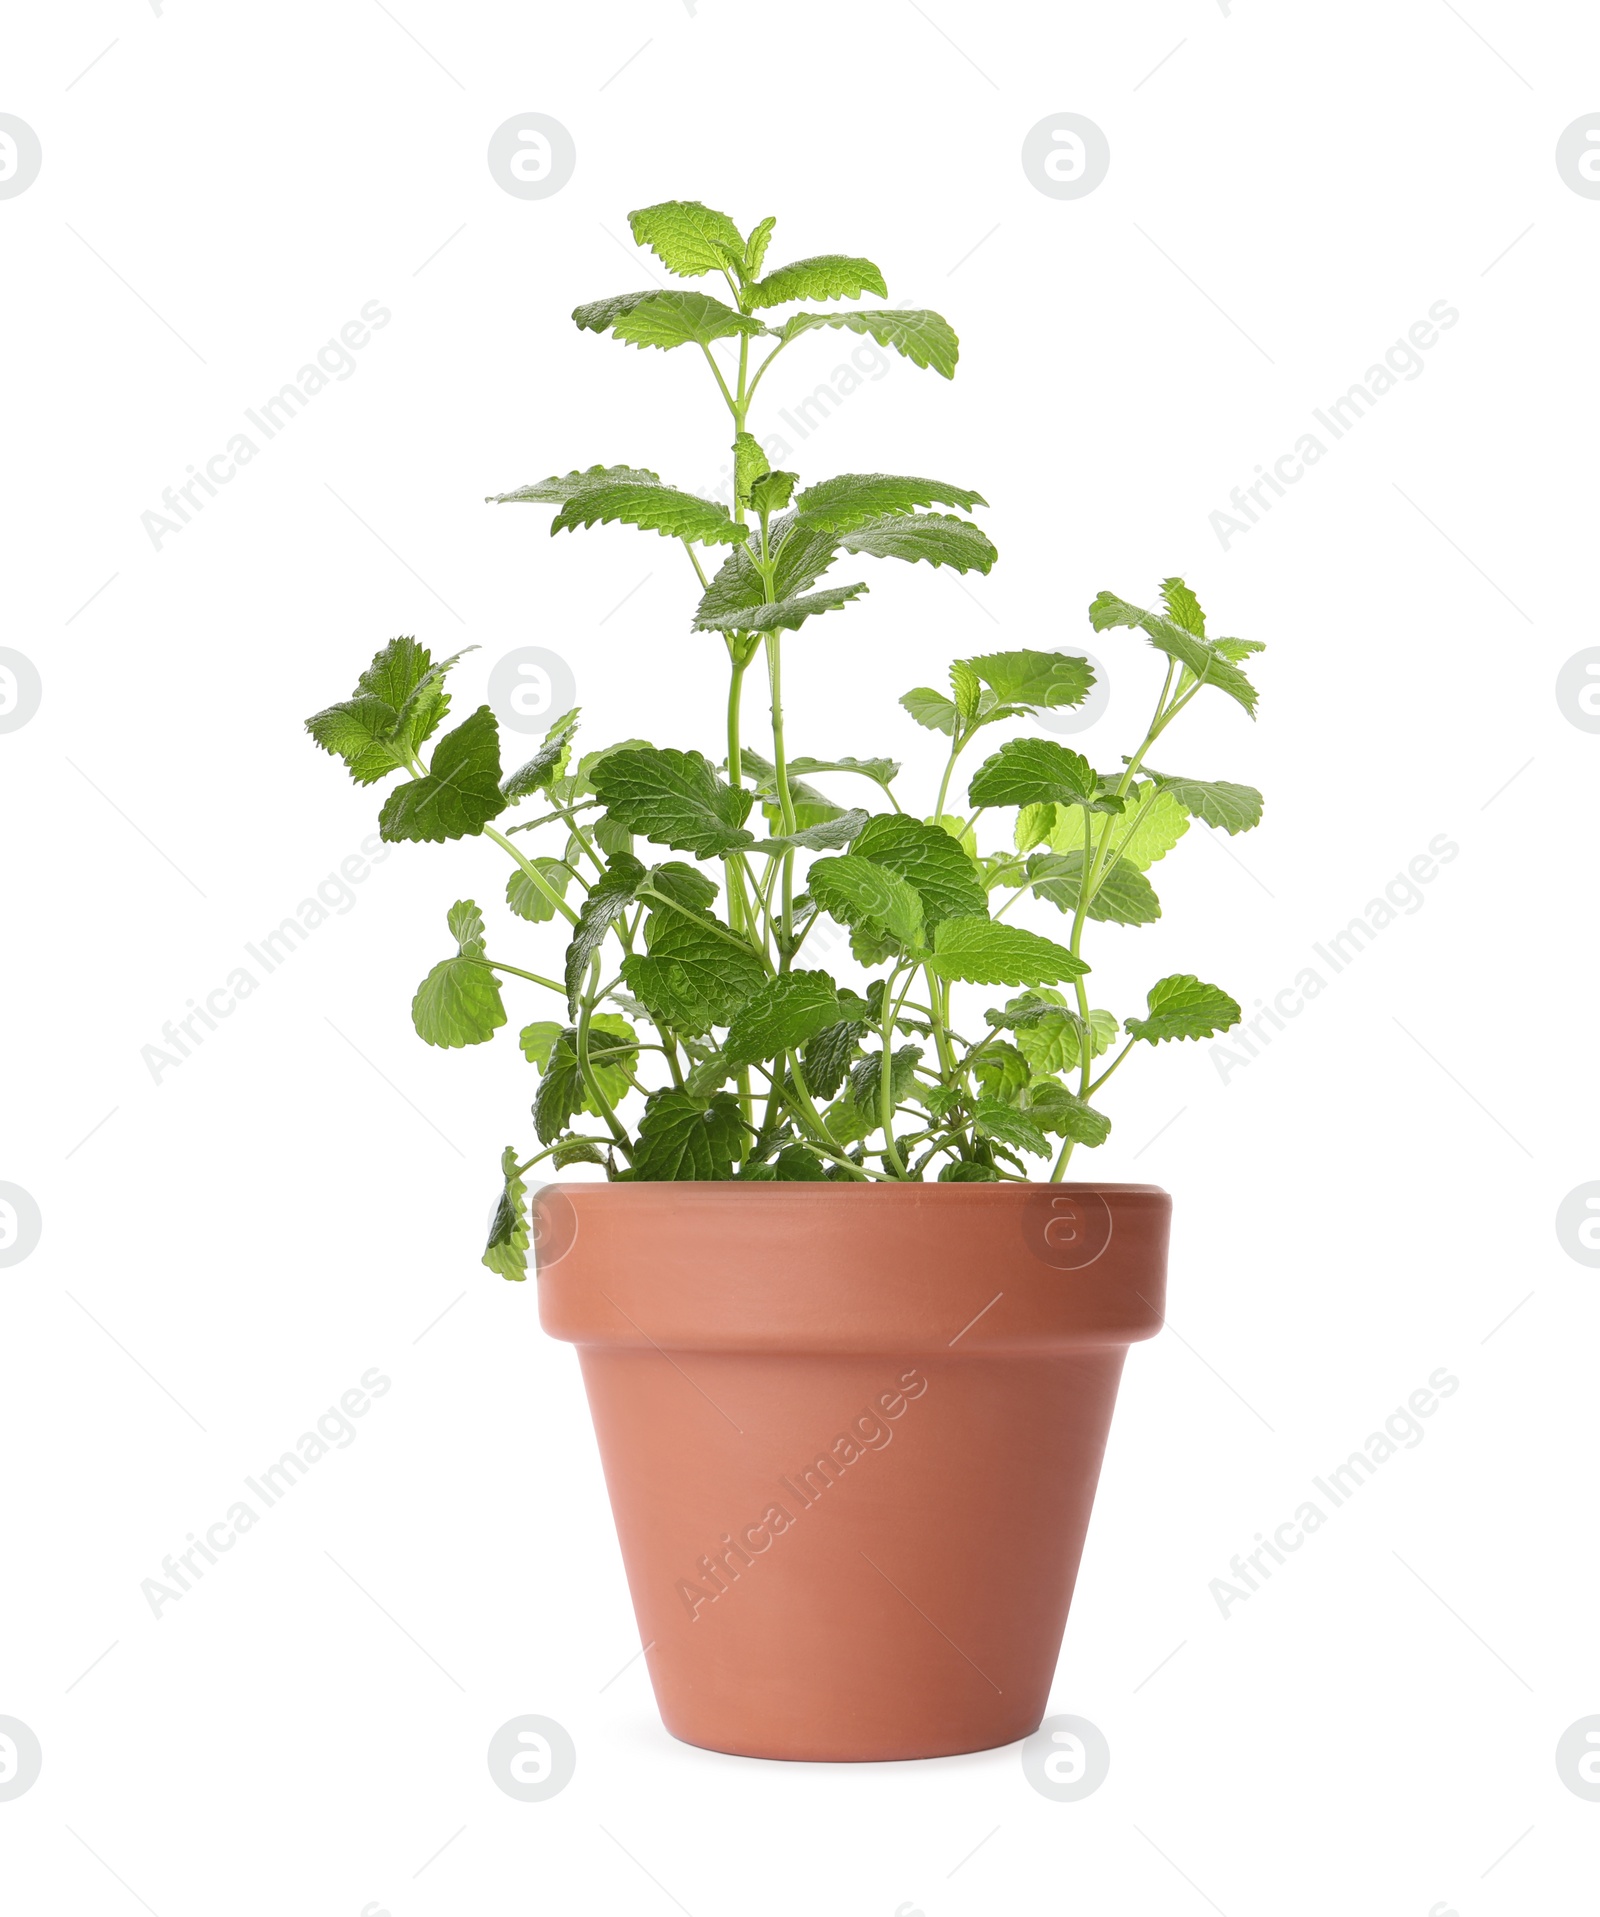 Image of Green lemon balm in clay pot isolated on white